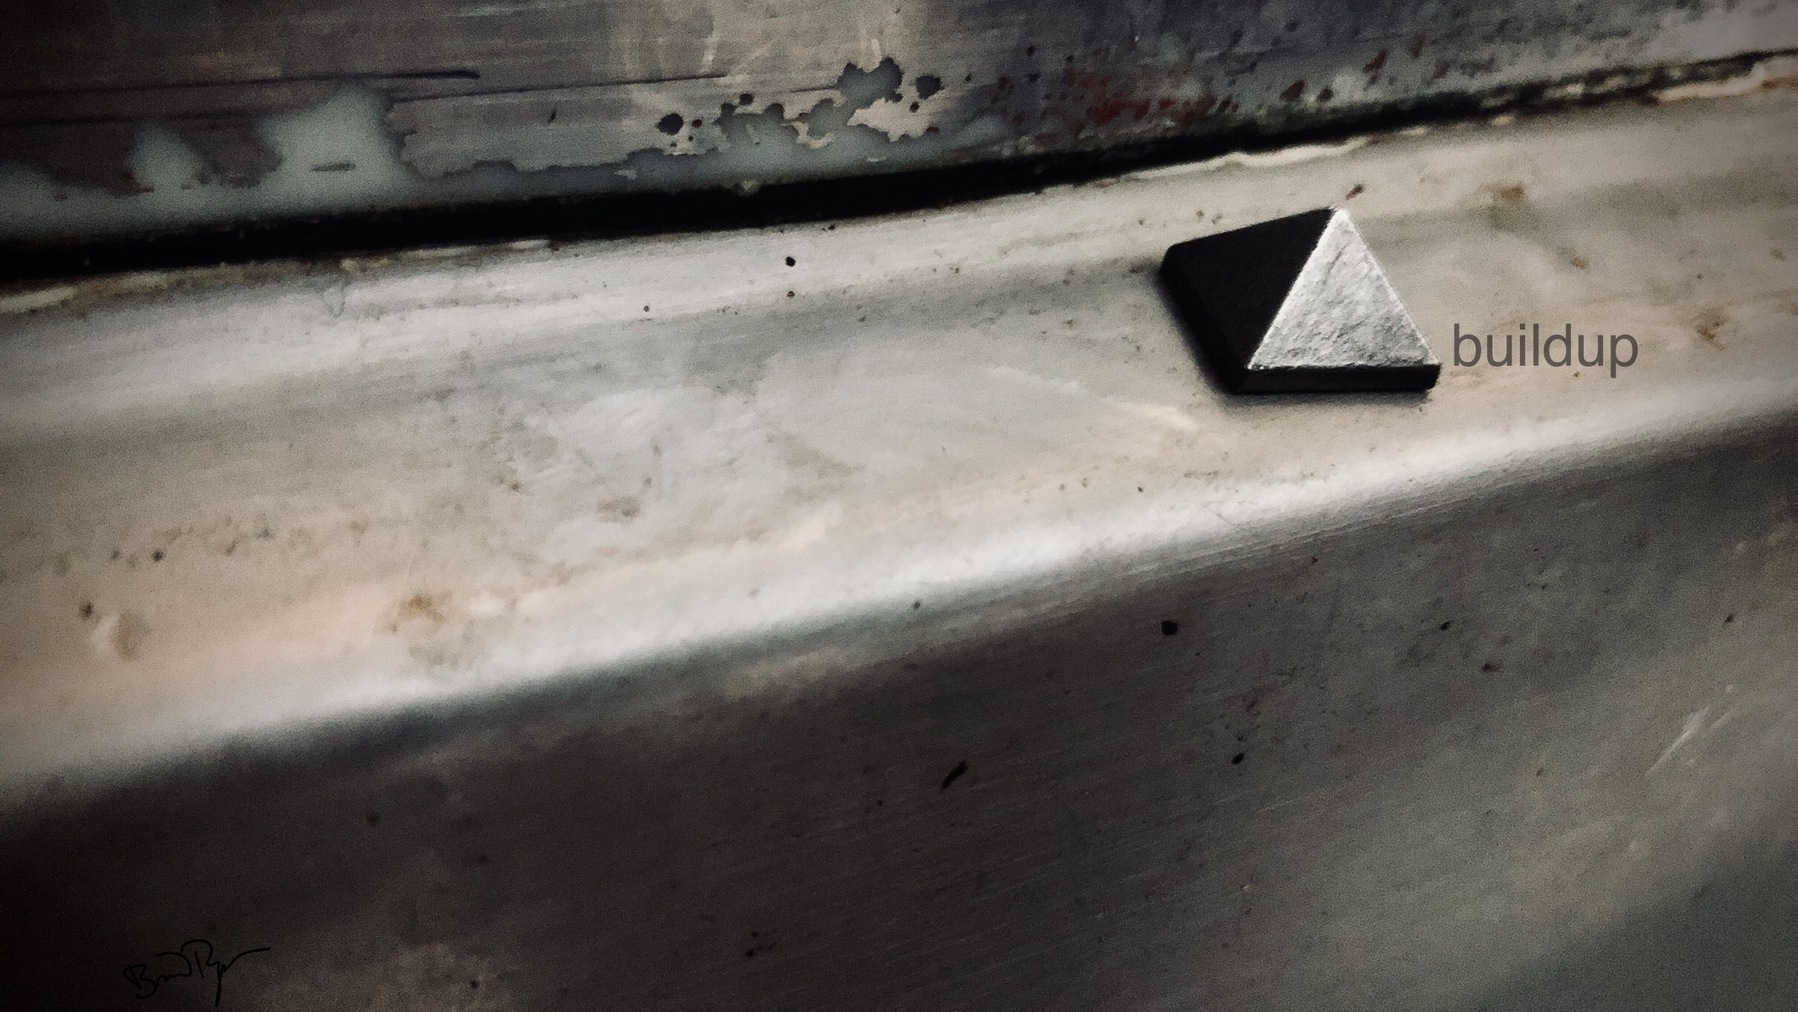 Close up of pyramid stud on metal shelf with corrosion and grime